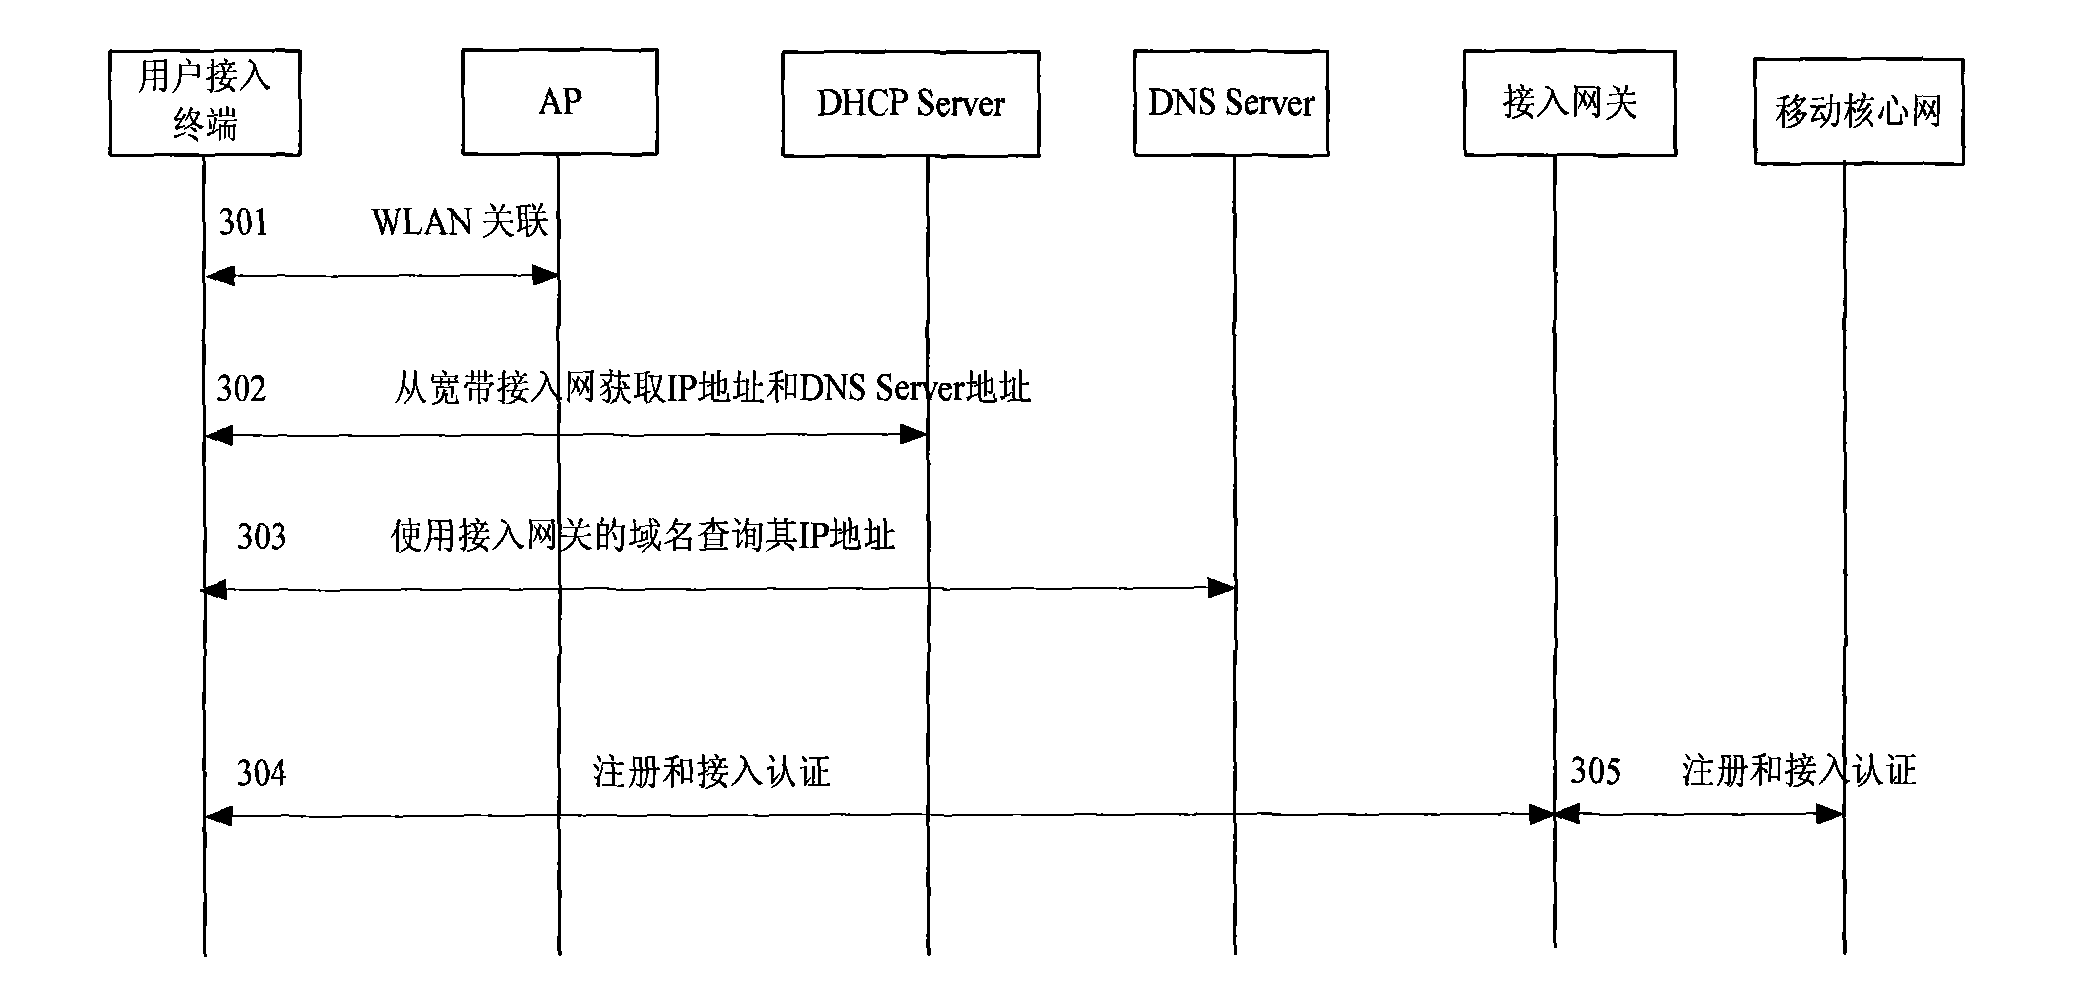 Method for accessing mobile core network by utilizing fixed network